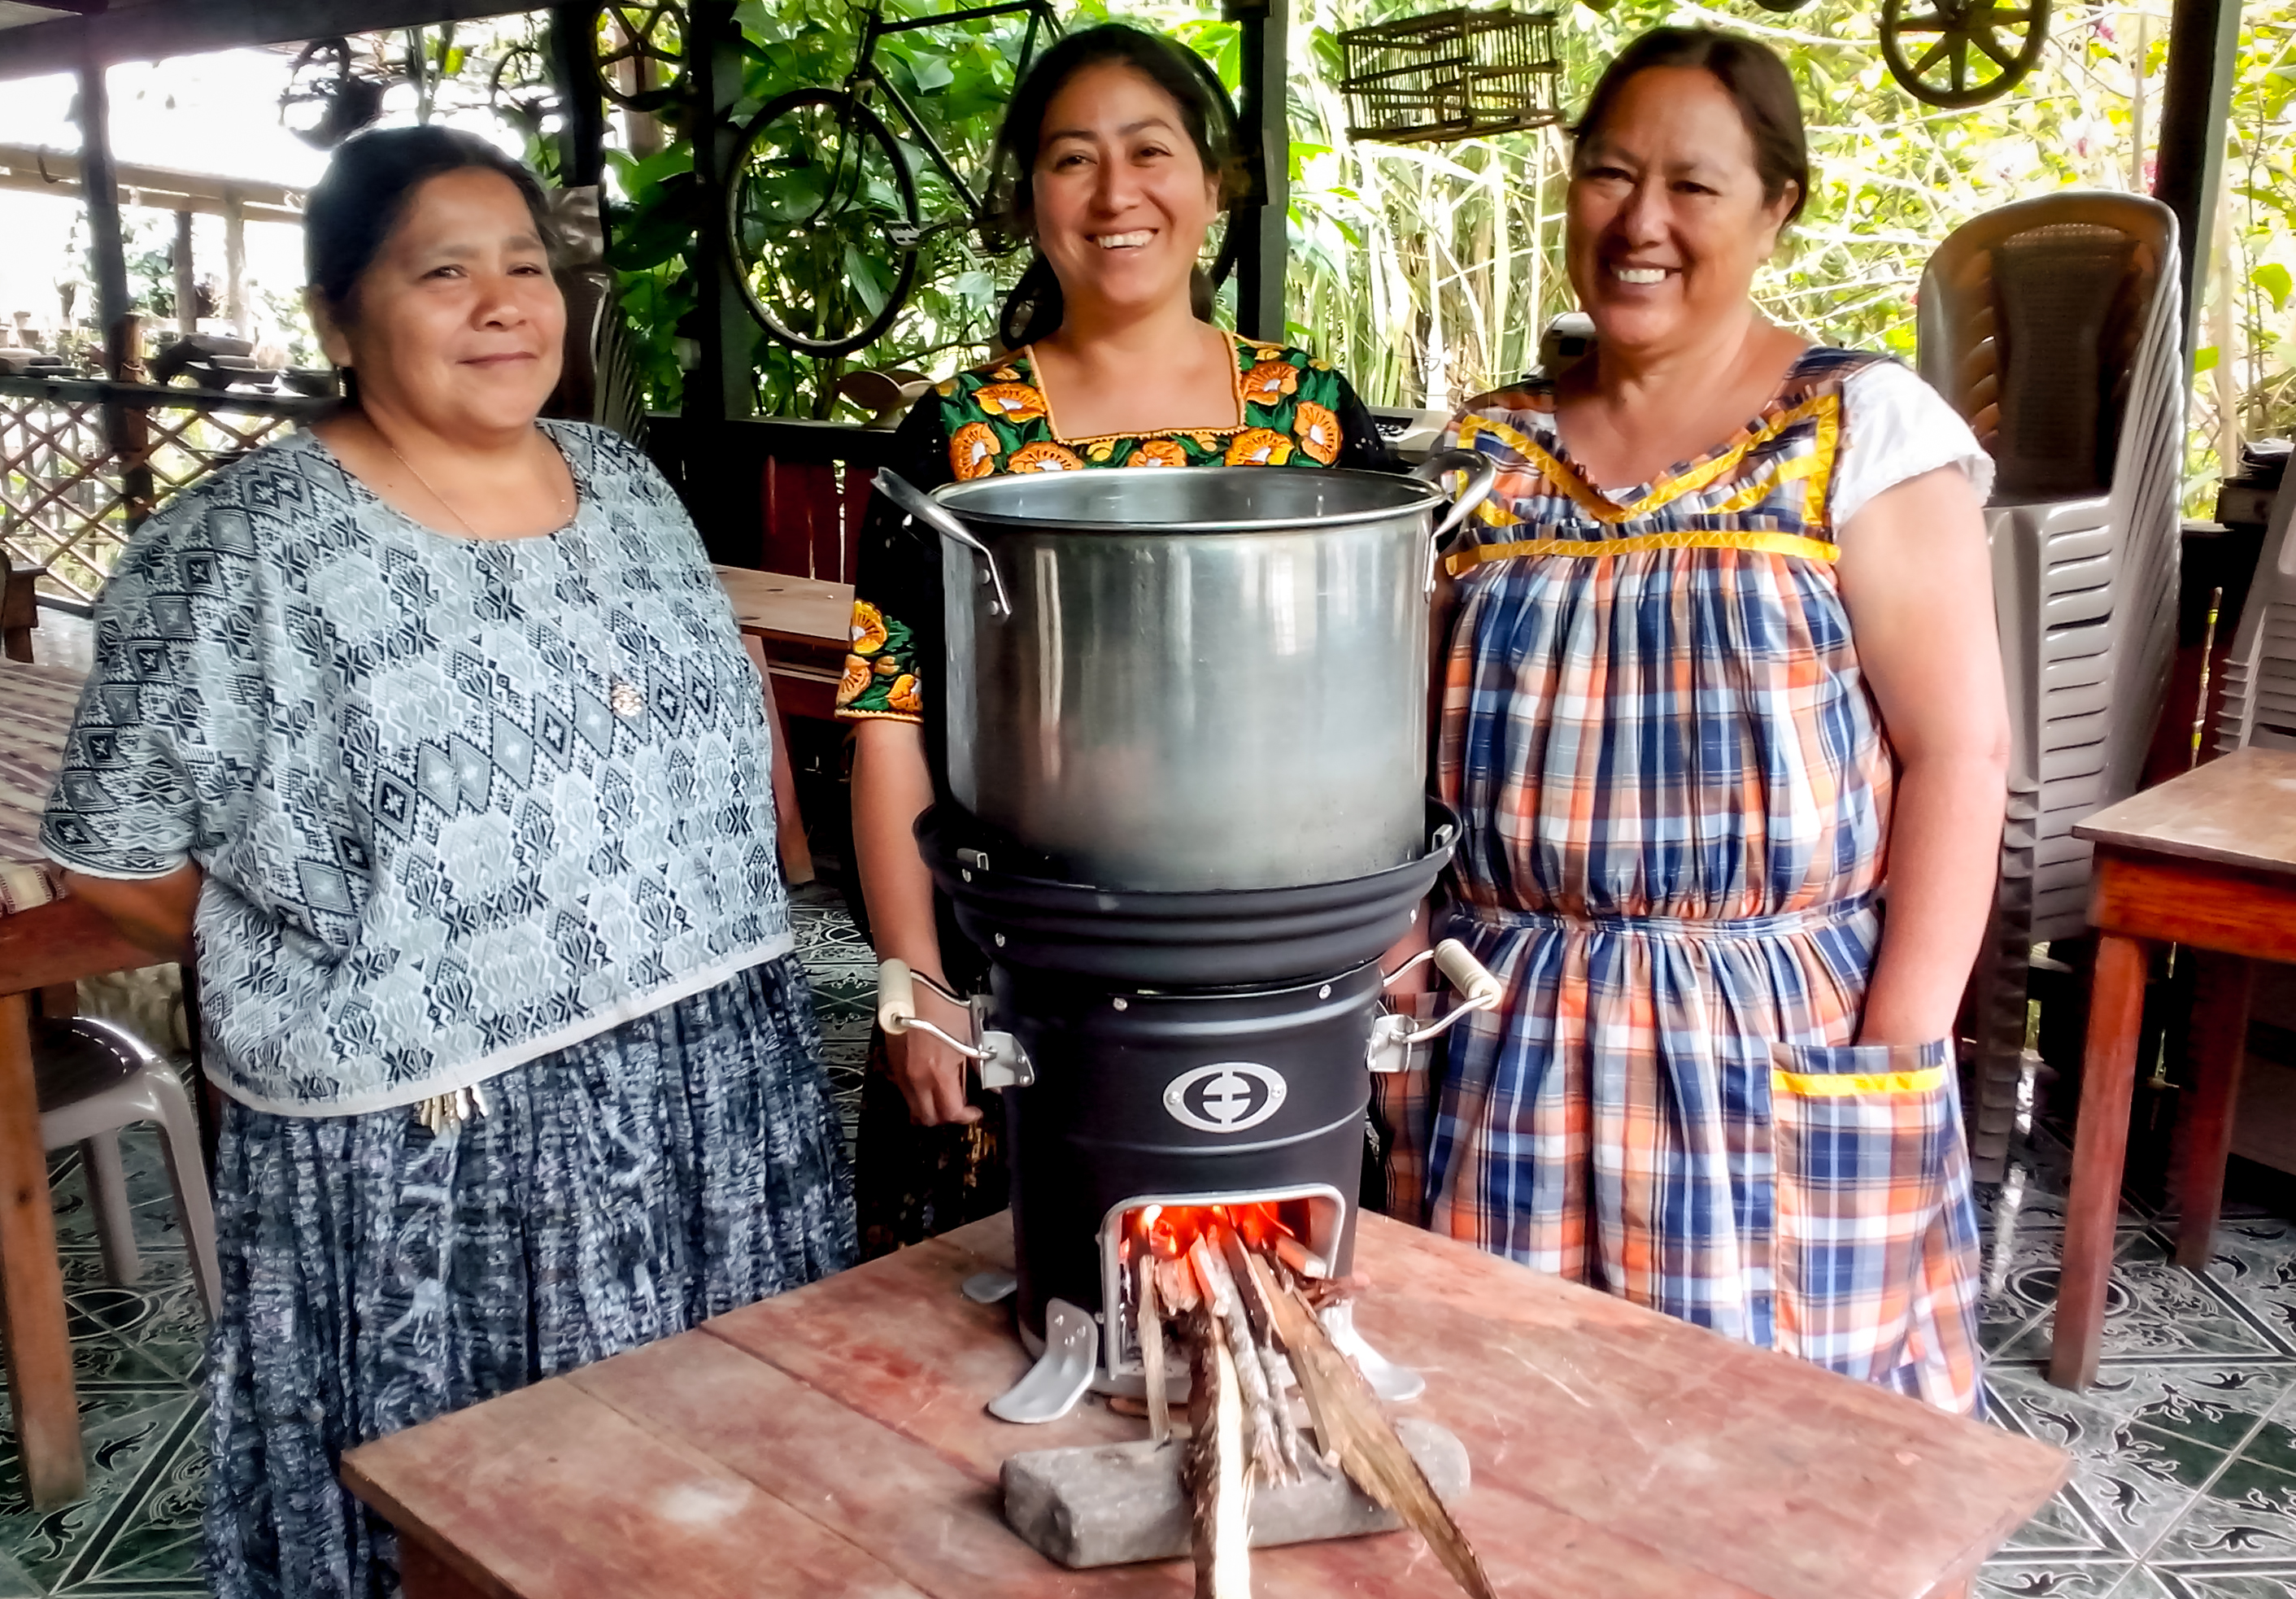 Calvert Foundation’s Community Investment Notes funnel money to community development organizations like Envirofit, which provides affordable, energy-efficient, durable cookstoves to people in developing countries, like these women in Honduras. | Photo from Envirofit